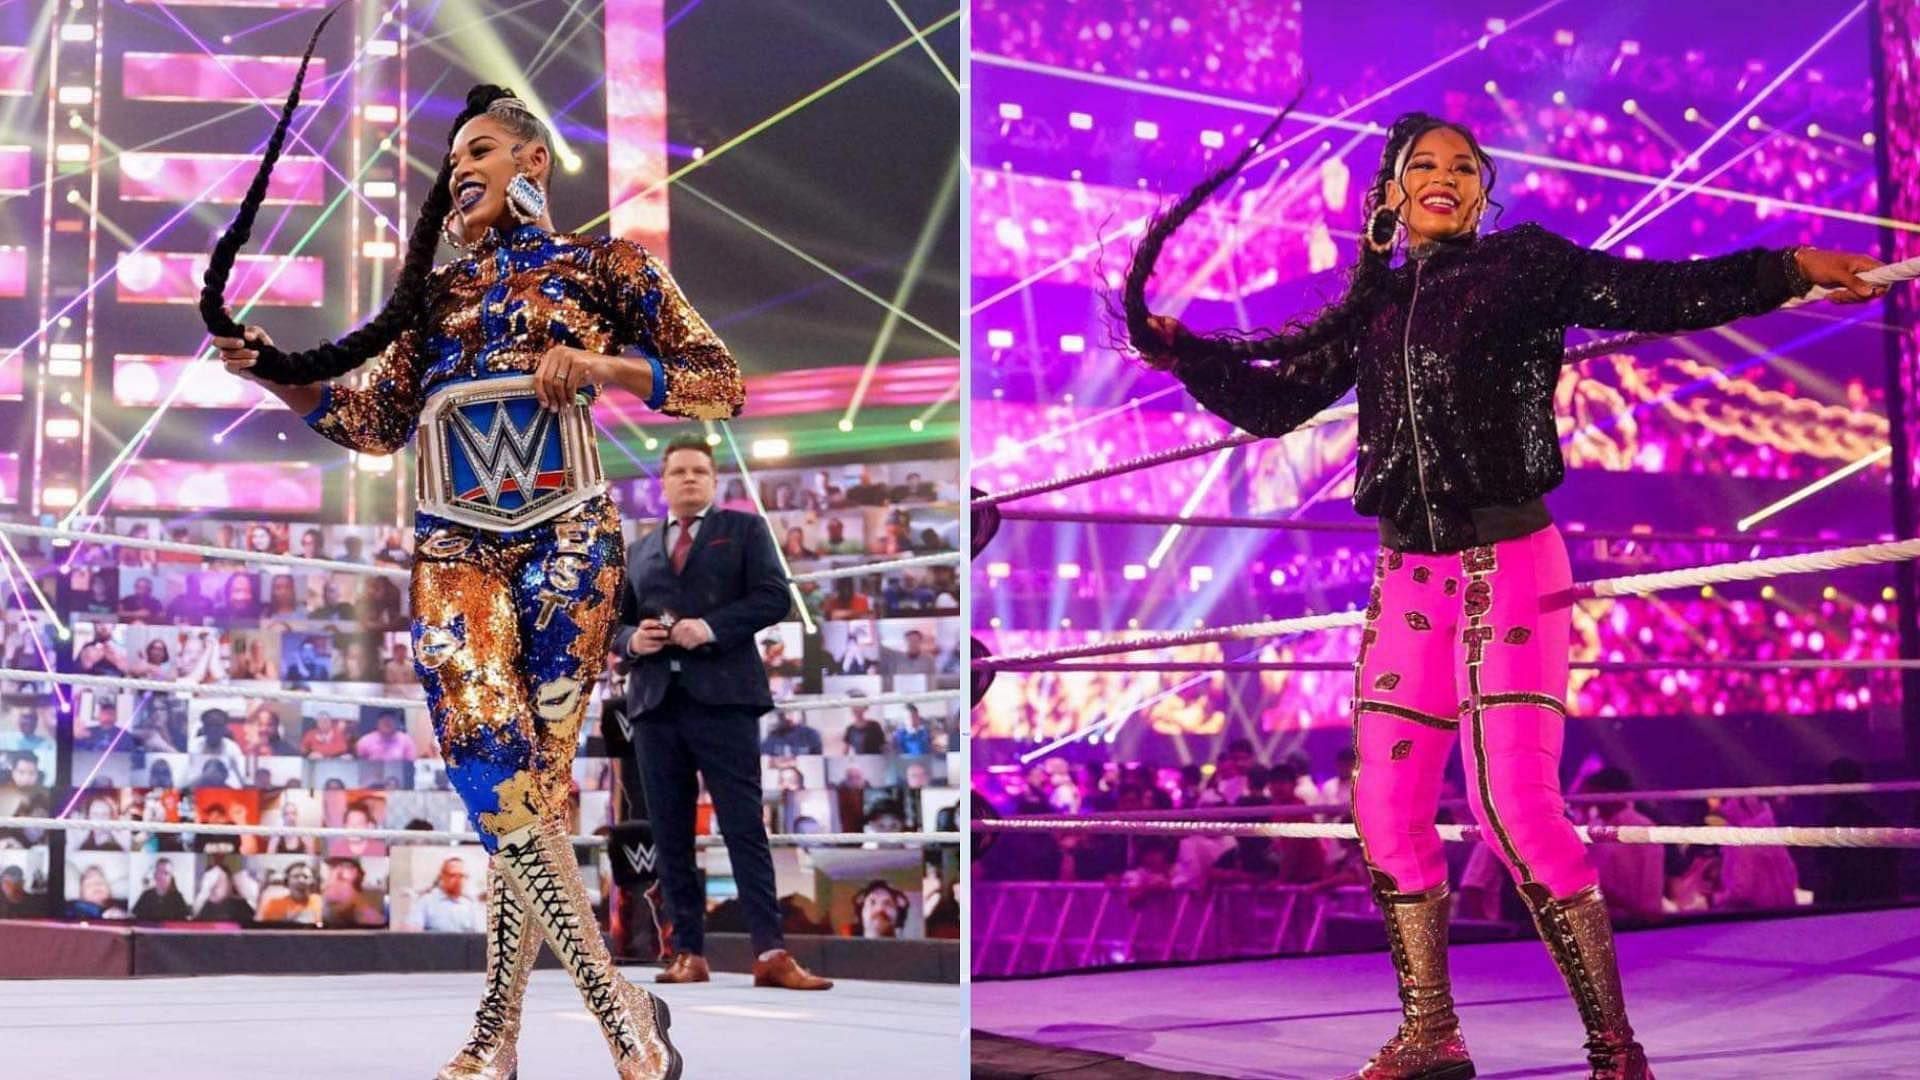 Bianca Belair is a former multi-time women